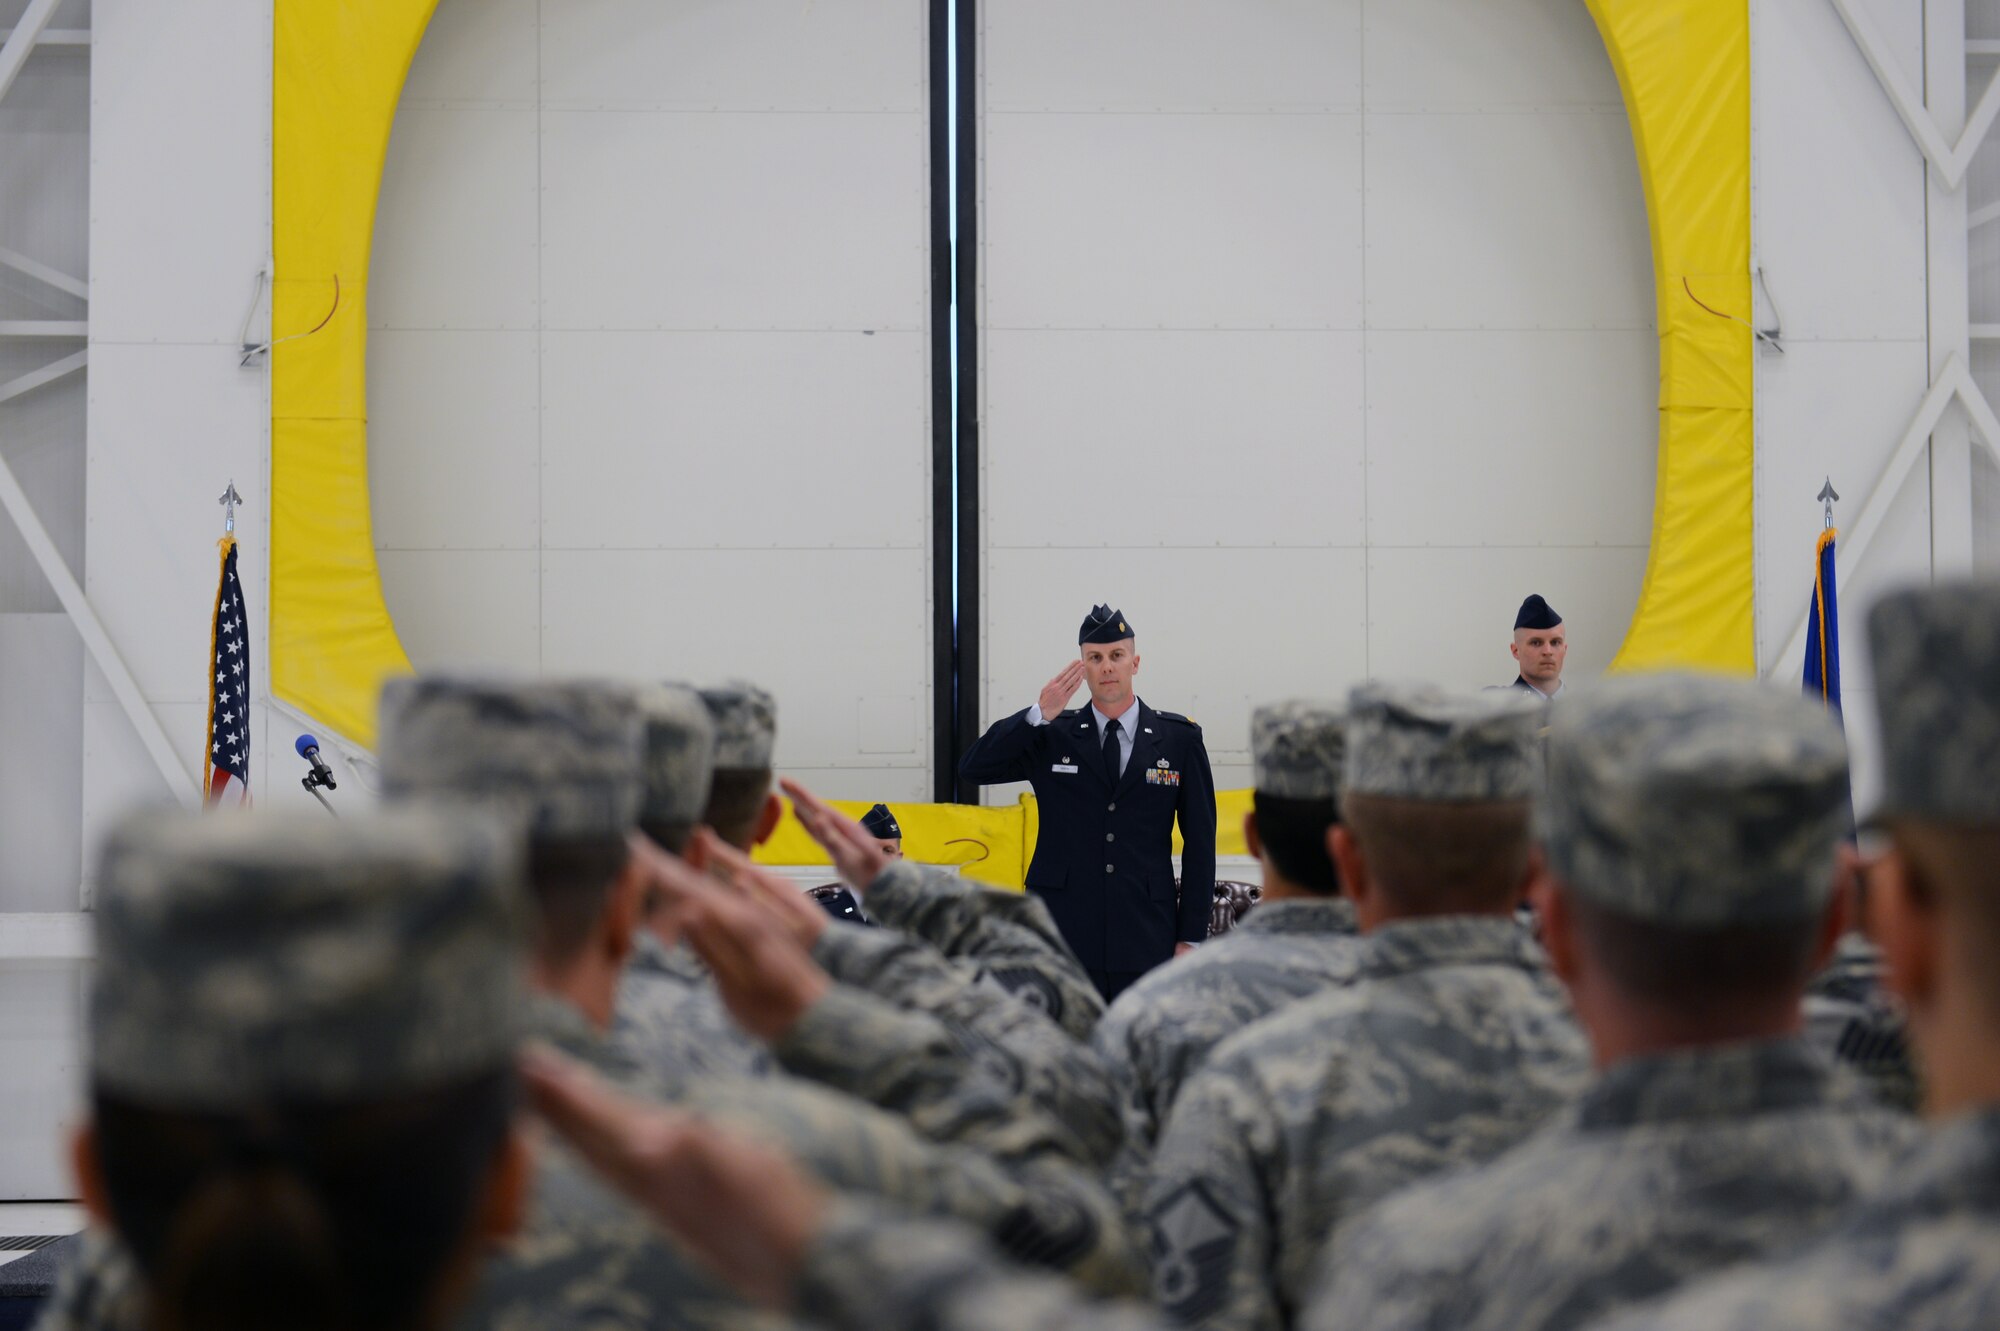 Maj. Clinton Varty, outgoing 62nd Maintenance Operations Squadron commander, renders the final salute to his squadron members prior to the 62nd MOS deactivation May 13, 2013 at Joint Base Lewis-McChord, Wash. Varty is slated to become the 62nd Maintenance Squadron commander. (U.S. Air Force photo/Staff Sgt. Jason Truskowski)